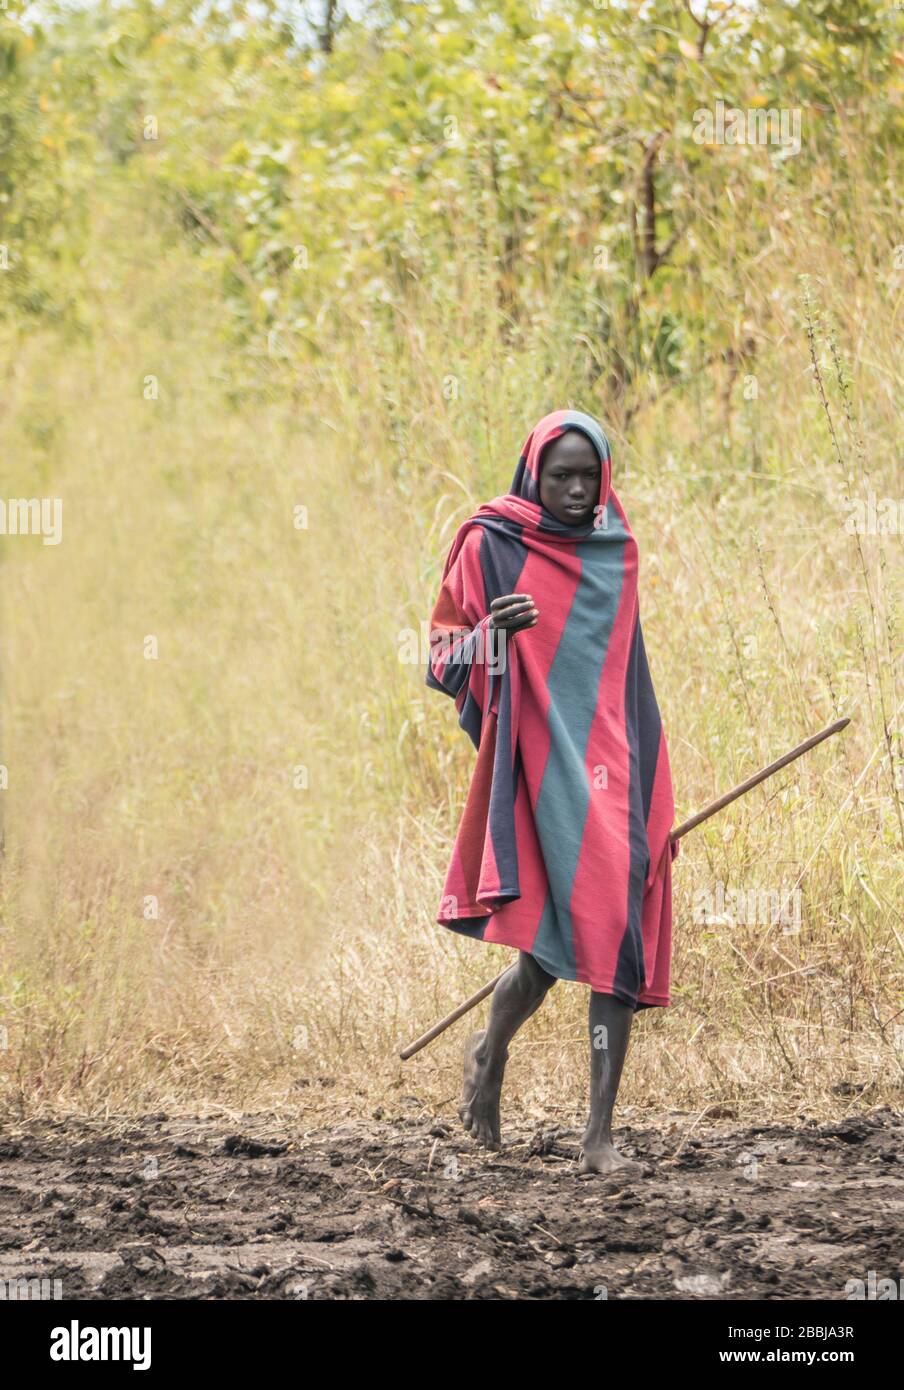 A Young Traditonal Mursi Tribe Man walkling with a Donga Stick used for Fighting near the Mursi Village in the Omo Valley in Southern Ethiopia wearing Stock Photo